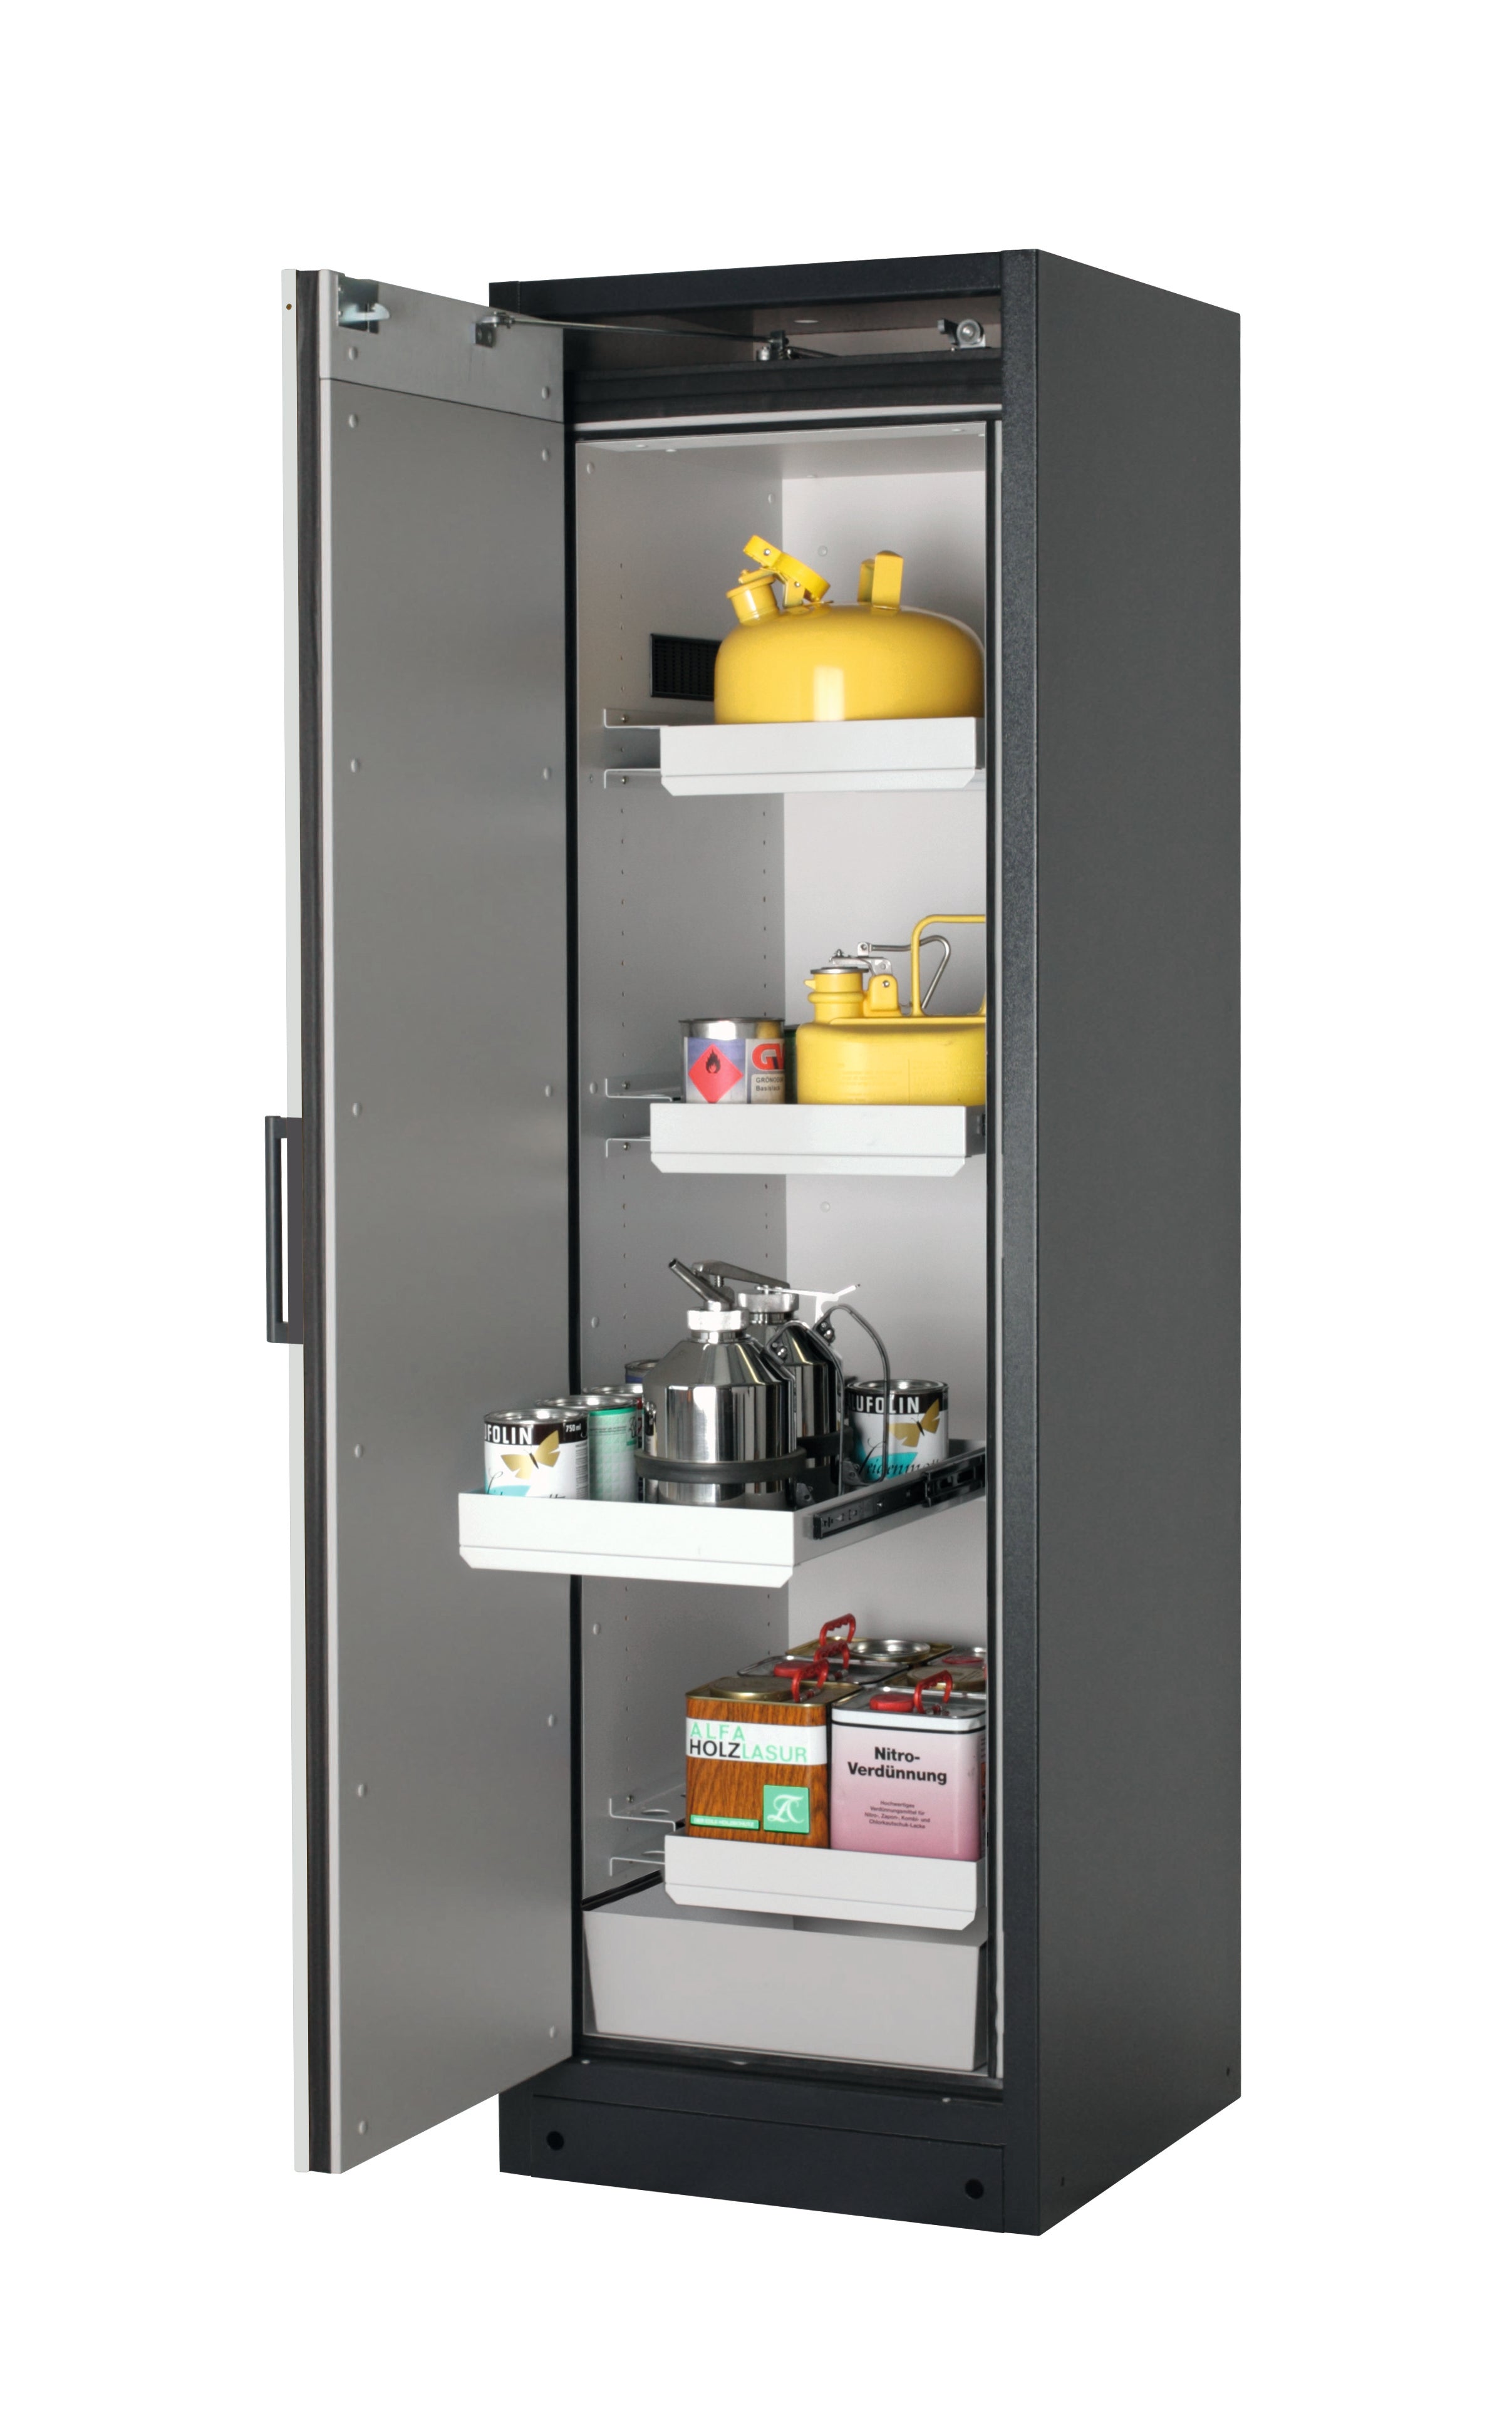 Type 90 safety storage cabinet Q-CLASSIC-90 model Q90.195.060 in light grey RAL 7035 with 3x drawer (standard) (sheet steel),